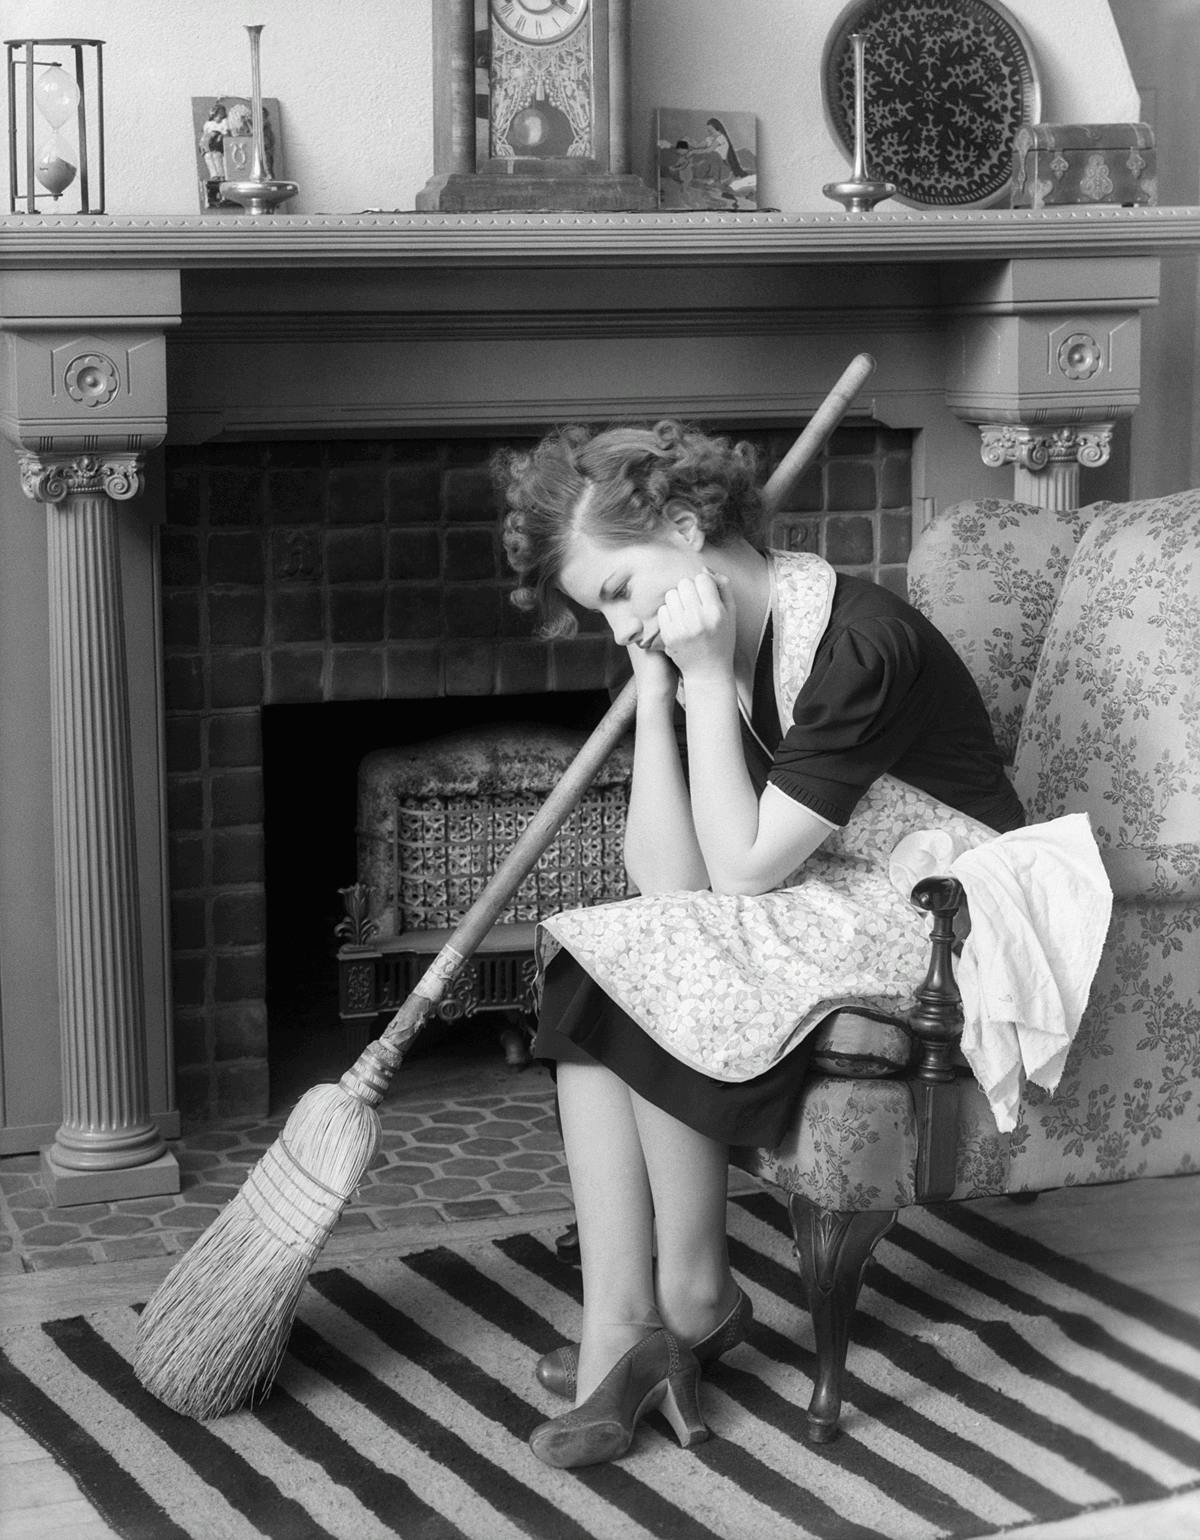 Black and white photo of an unhappy woman sitting on a chair head down in front of fireplace. She is wearing an apron and has a broom at her side.